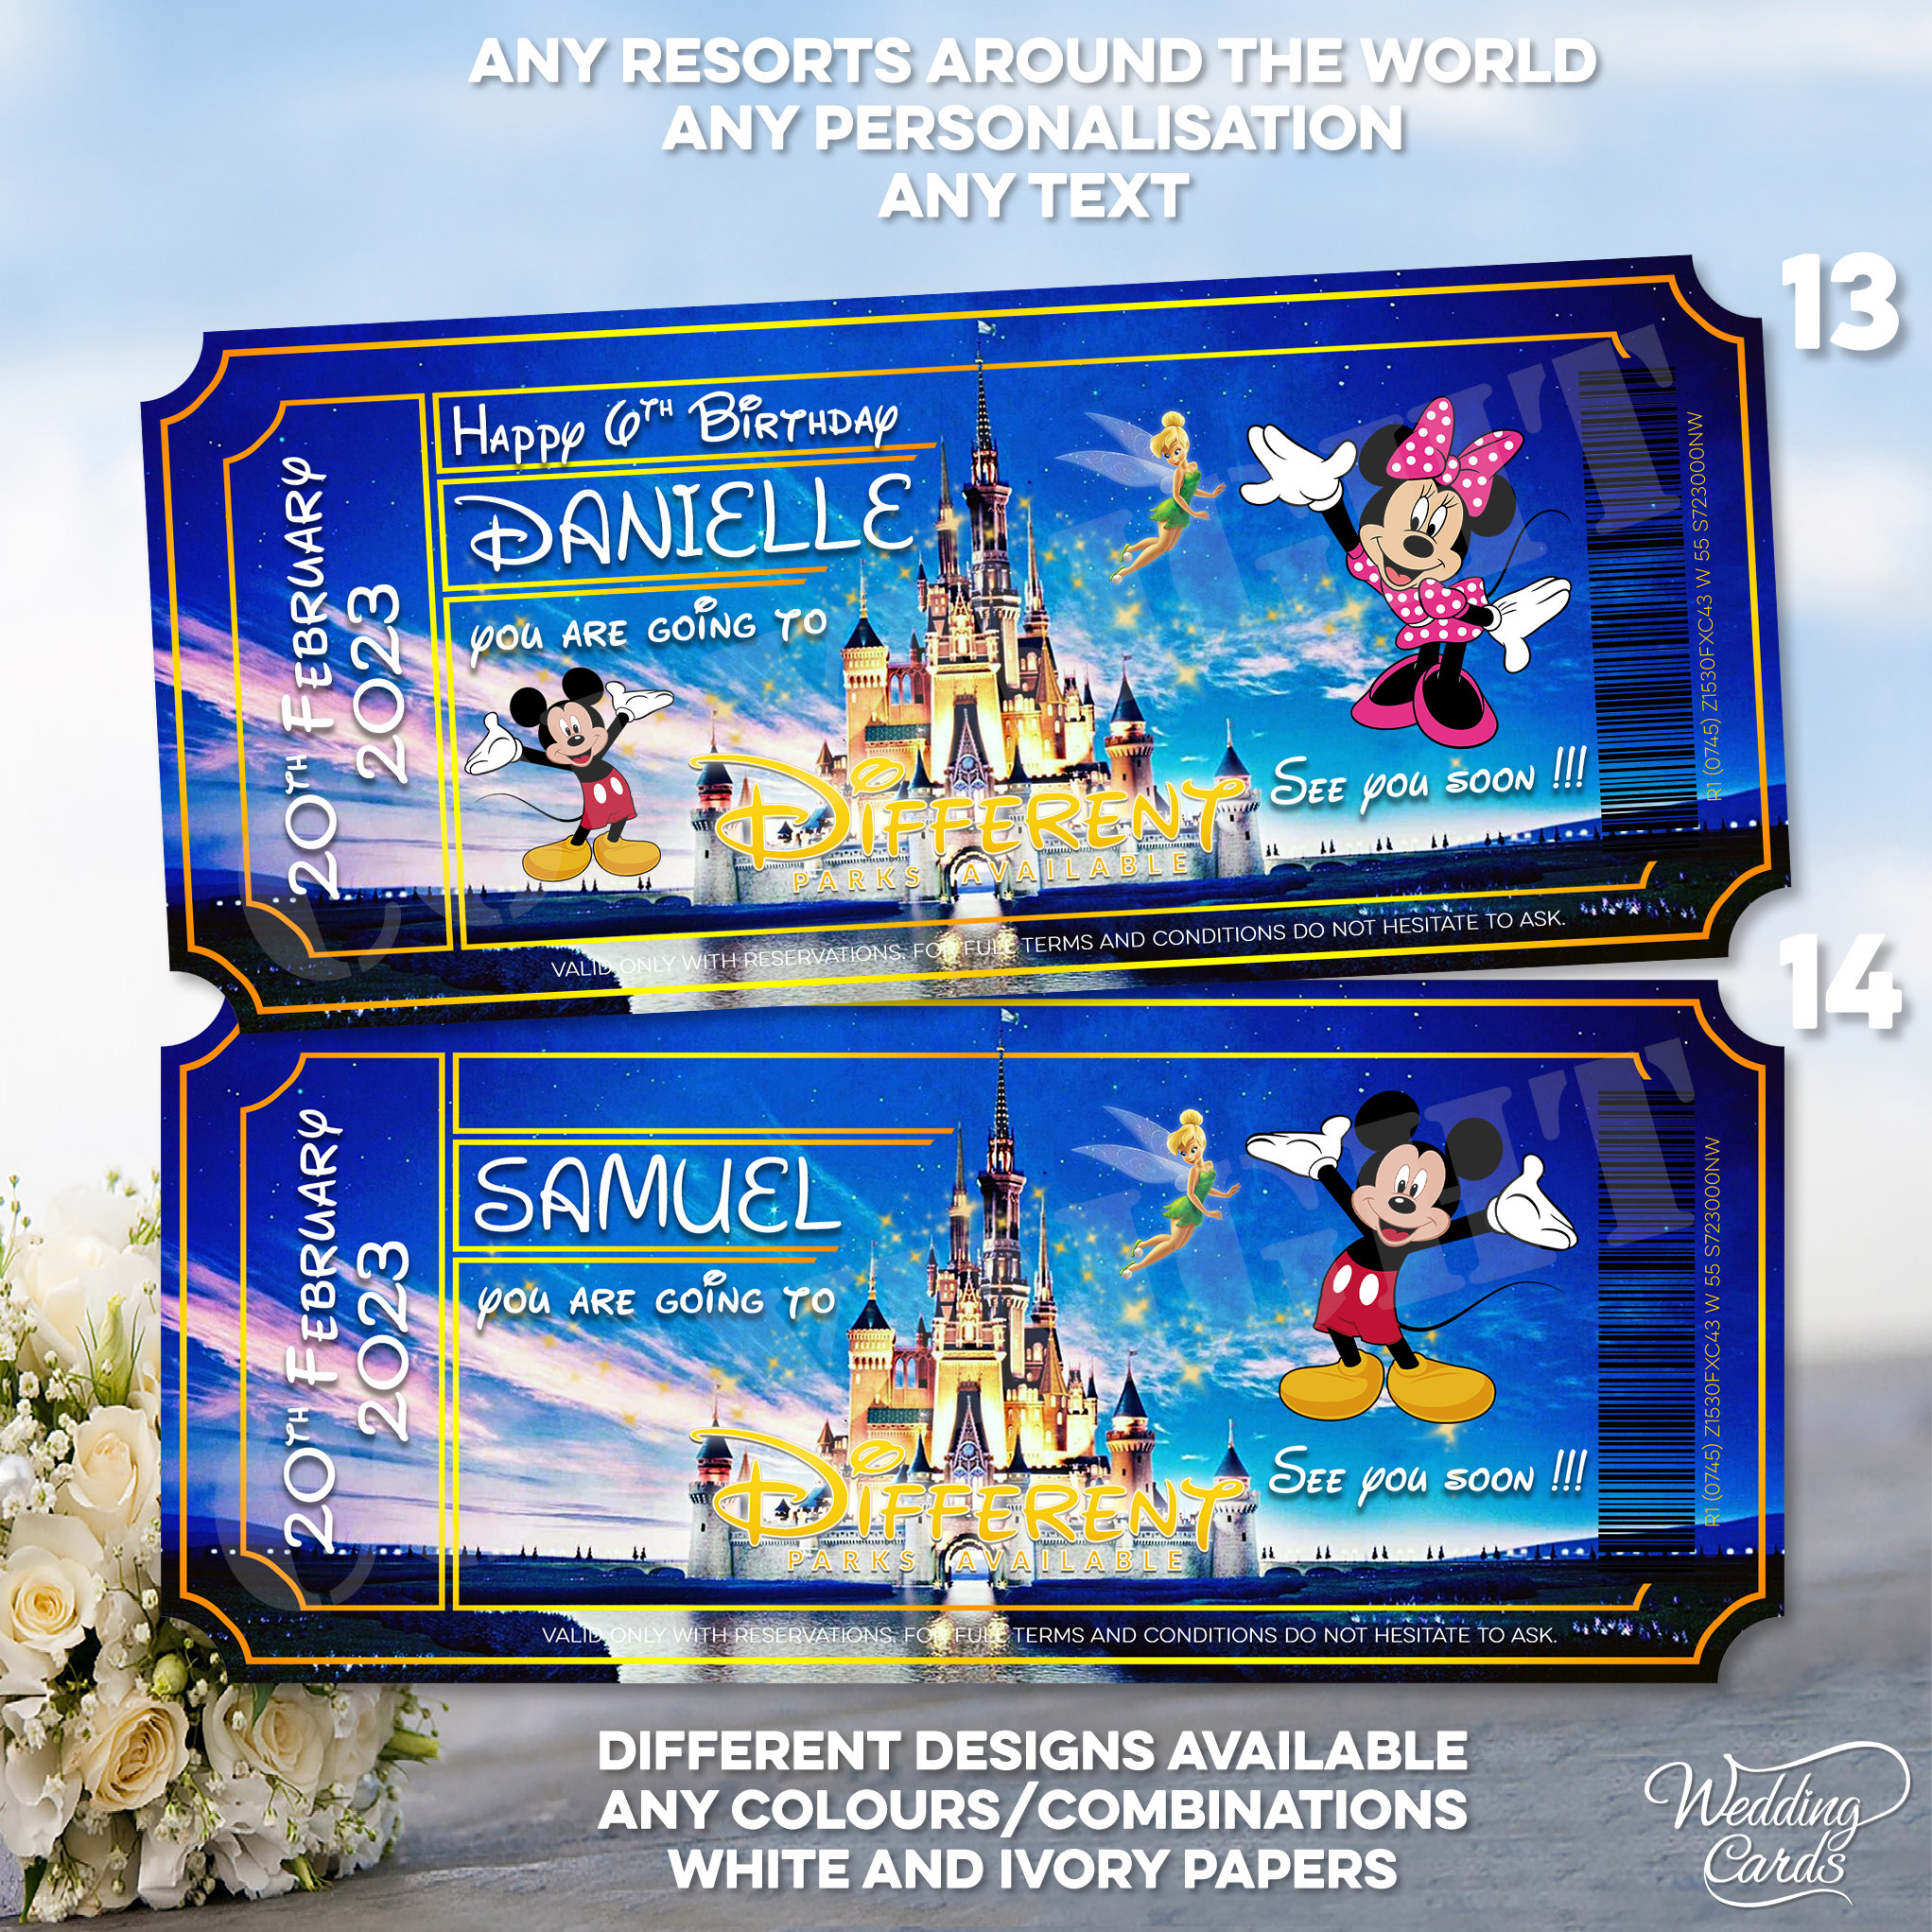 Personalised we're going to Disney Greeting Card* Surprise trip reveal glasses 